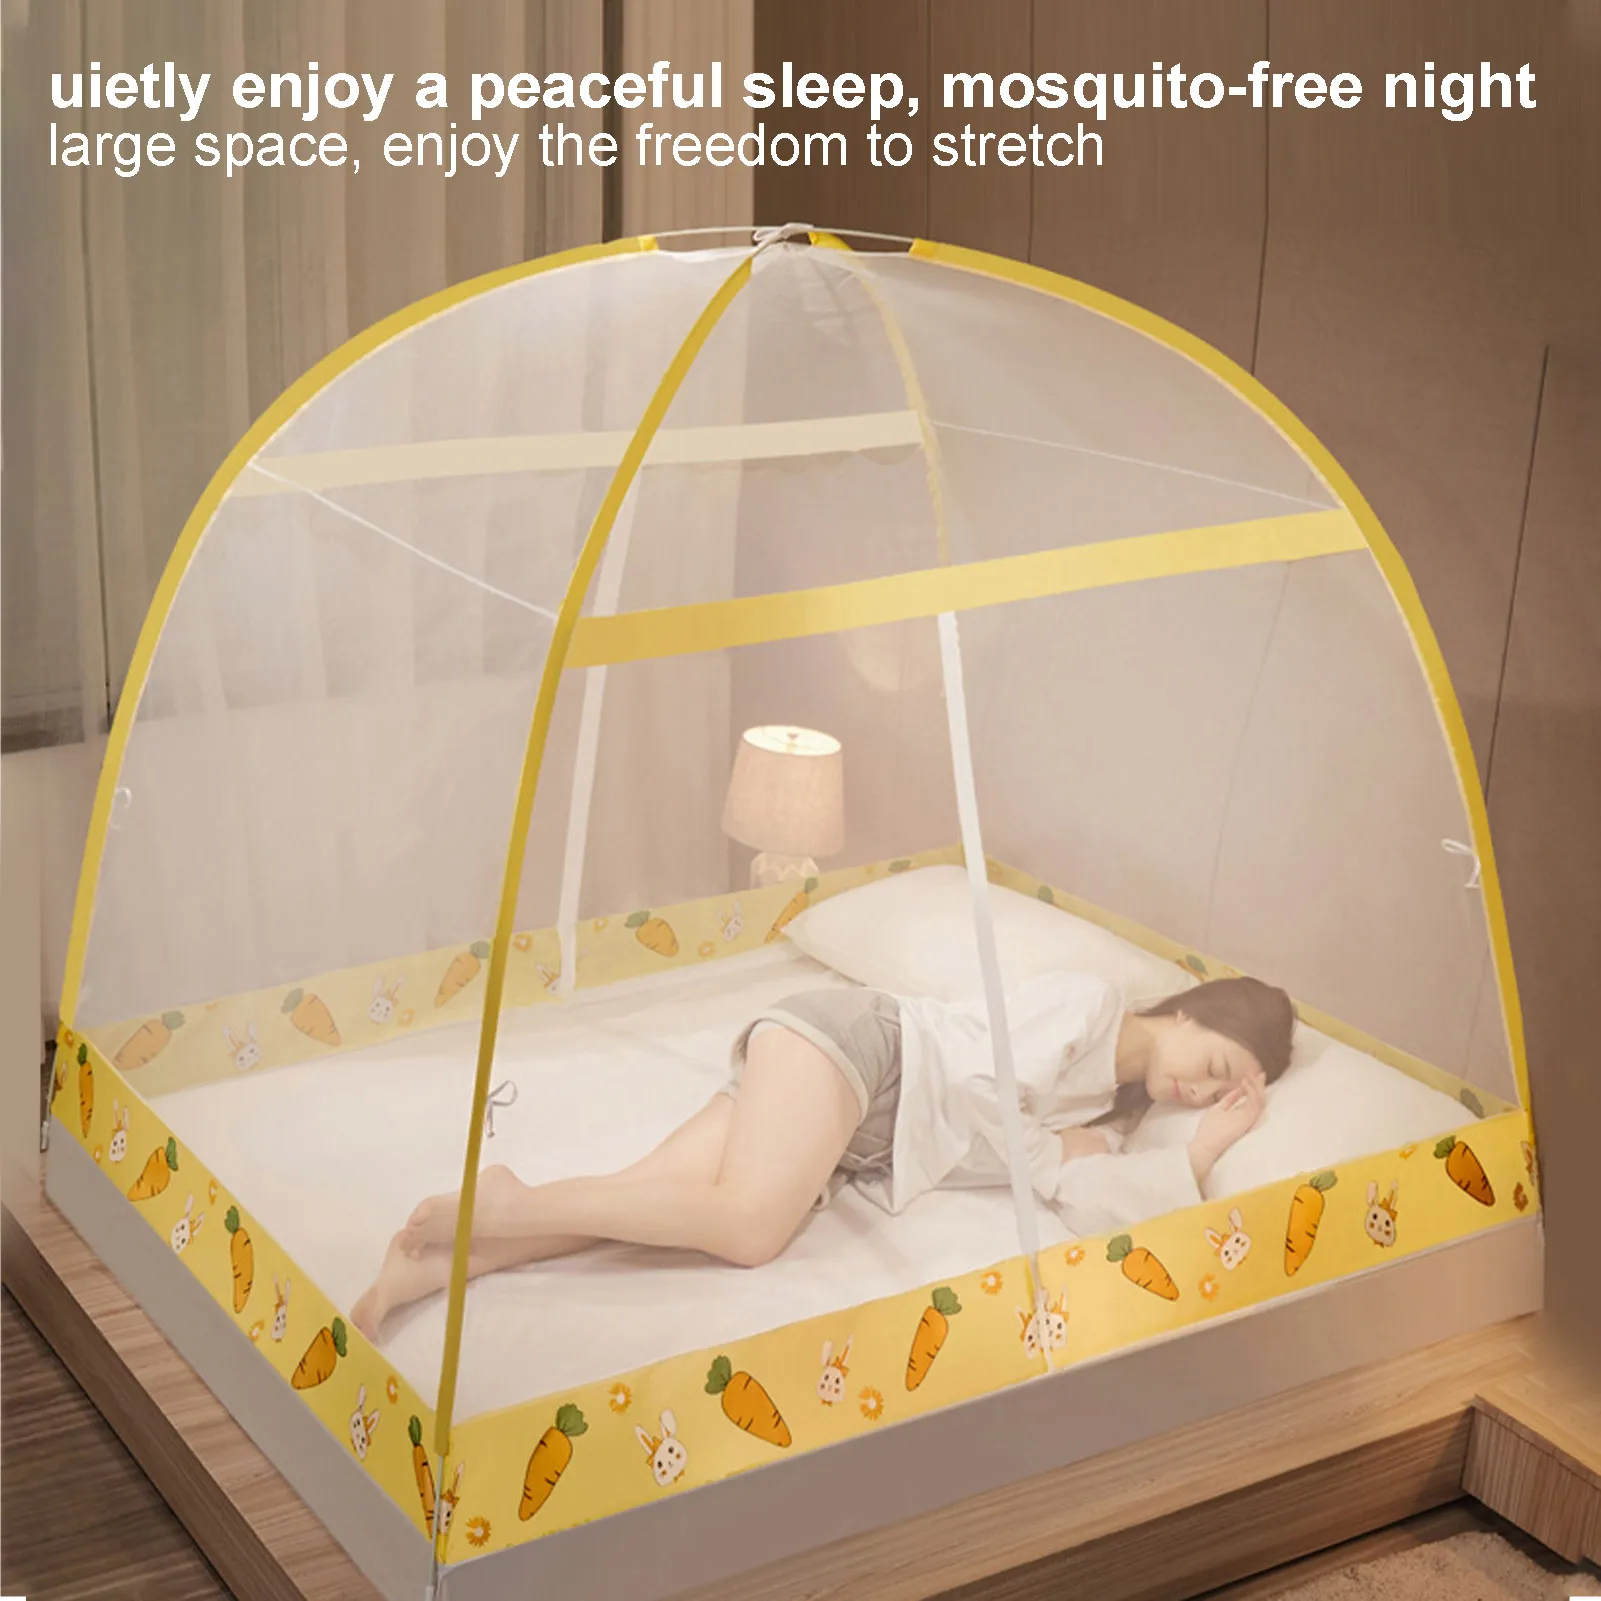 New Arrival Pop Up Camping Tent Bed Canopy Mosquito Net Full Queen King Size Netting Bedding Mongolian Yurt Mosquito Net